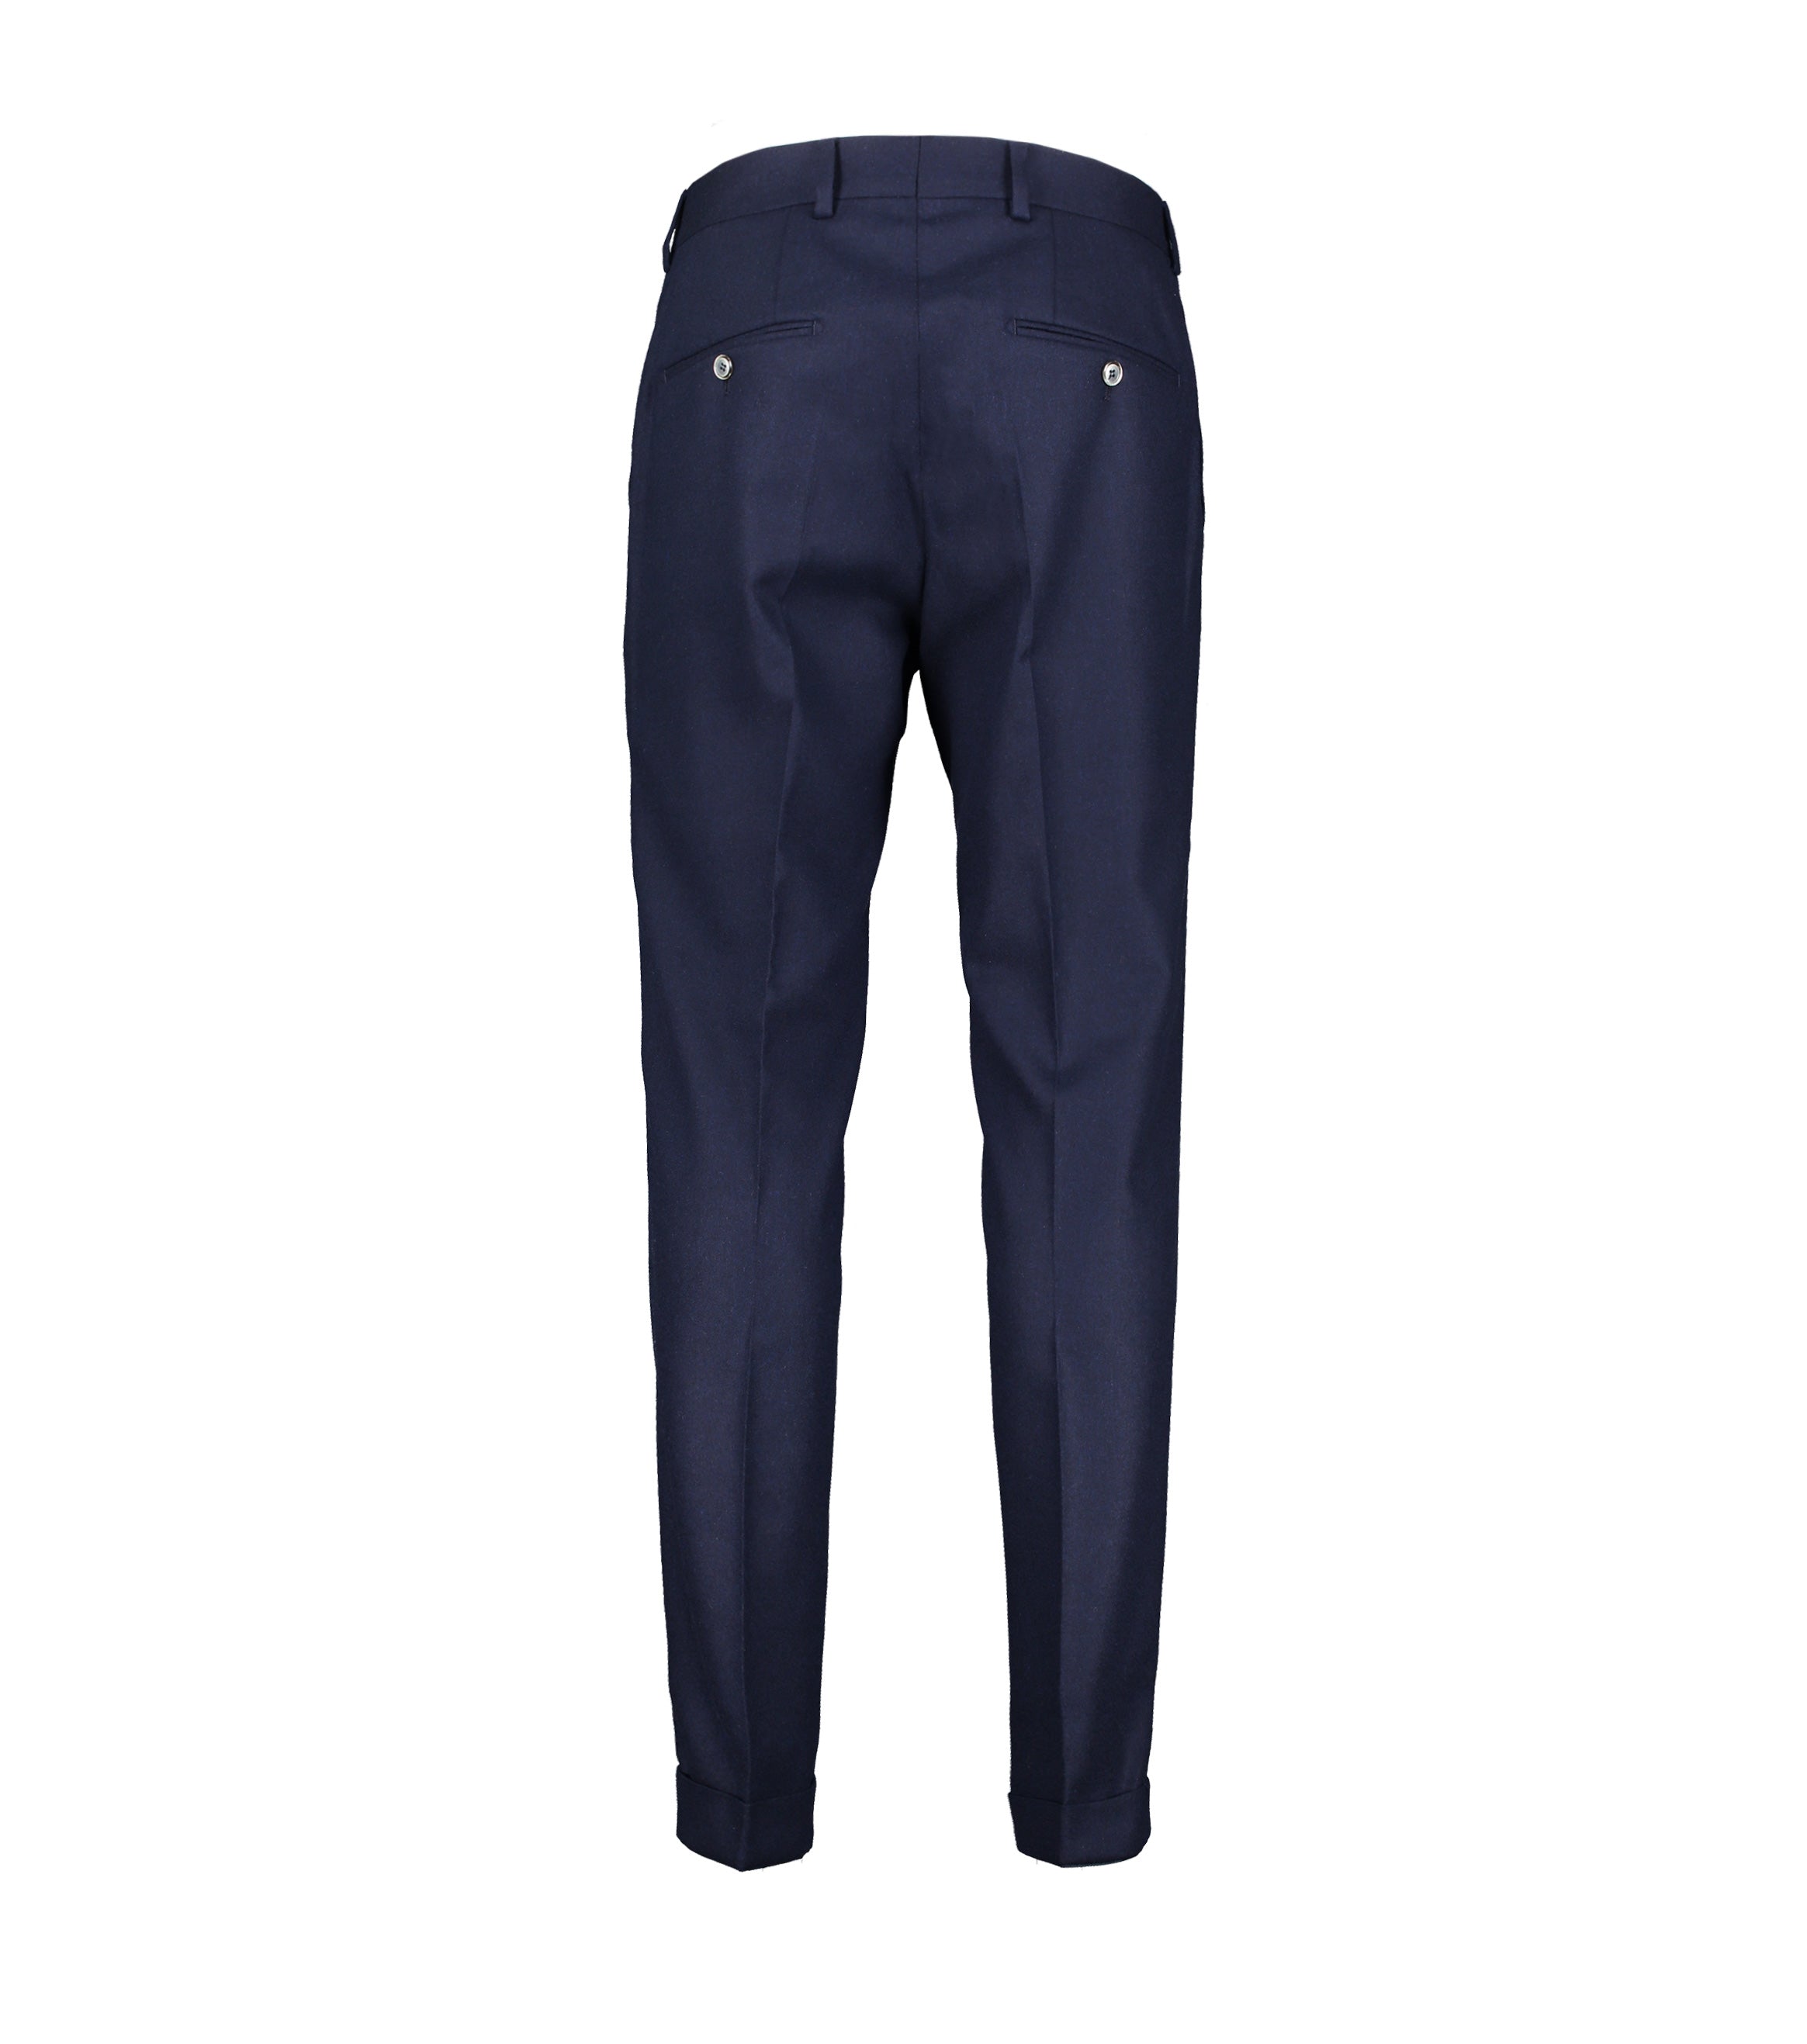 Alex Navy Flannel Stretch Trousers